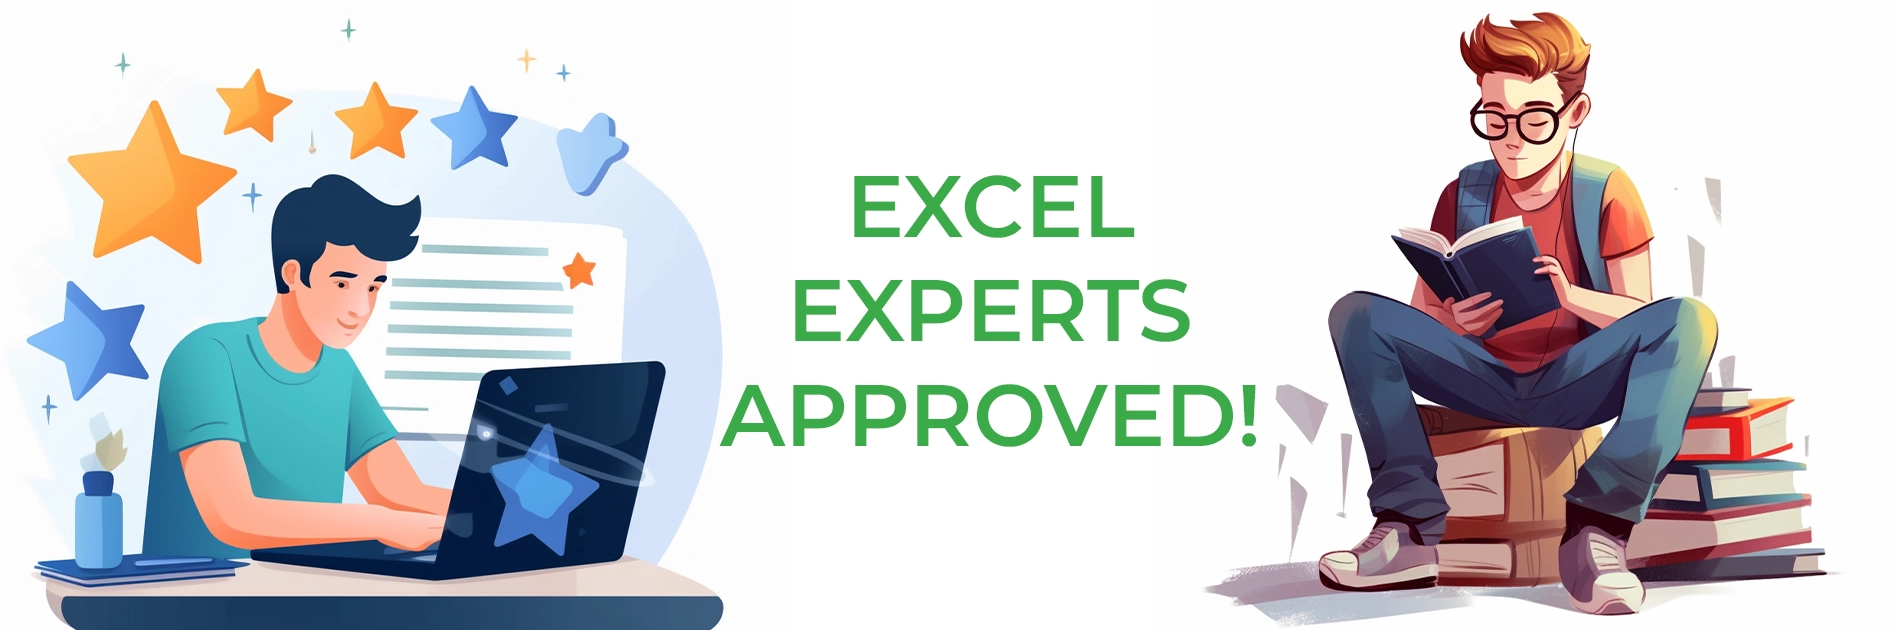 800+ Genuine Client Reviews for Our Excel Assignment Writing Service